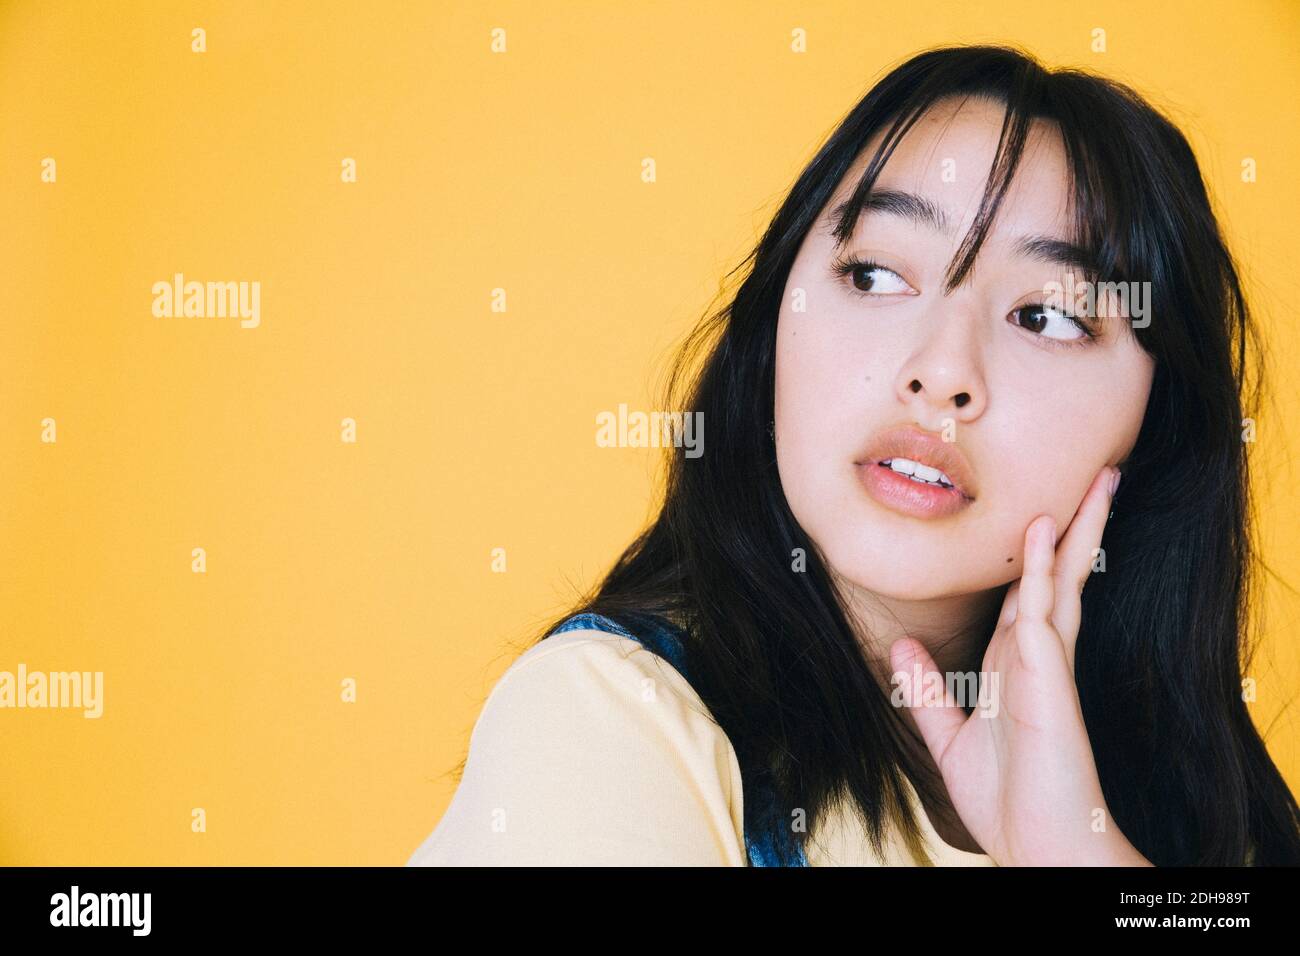 Close-up of girl looking away with hand on chin against yellow background Stock Photo